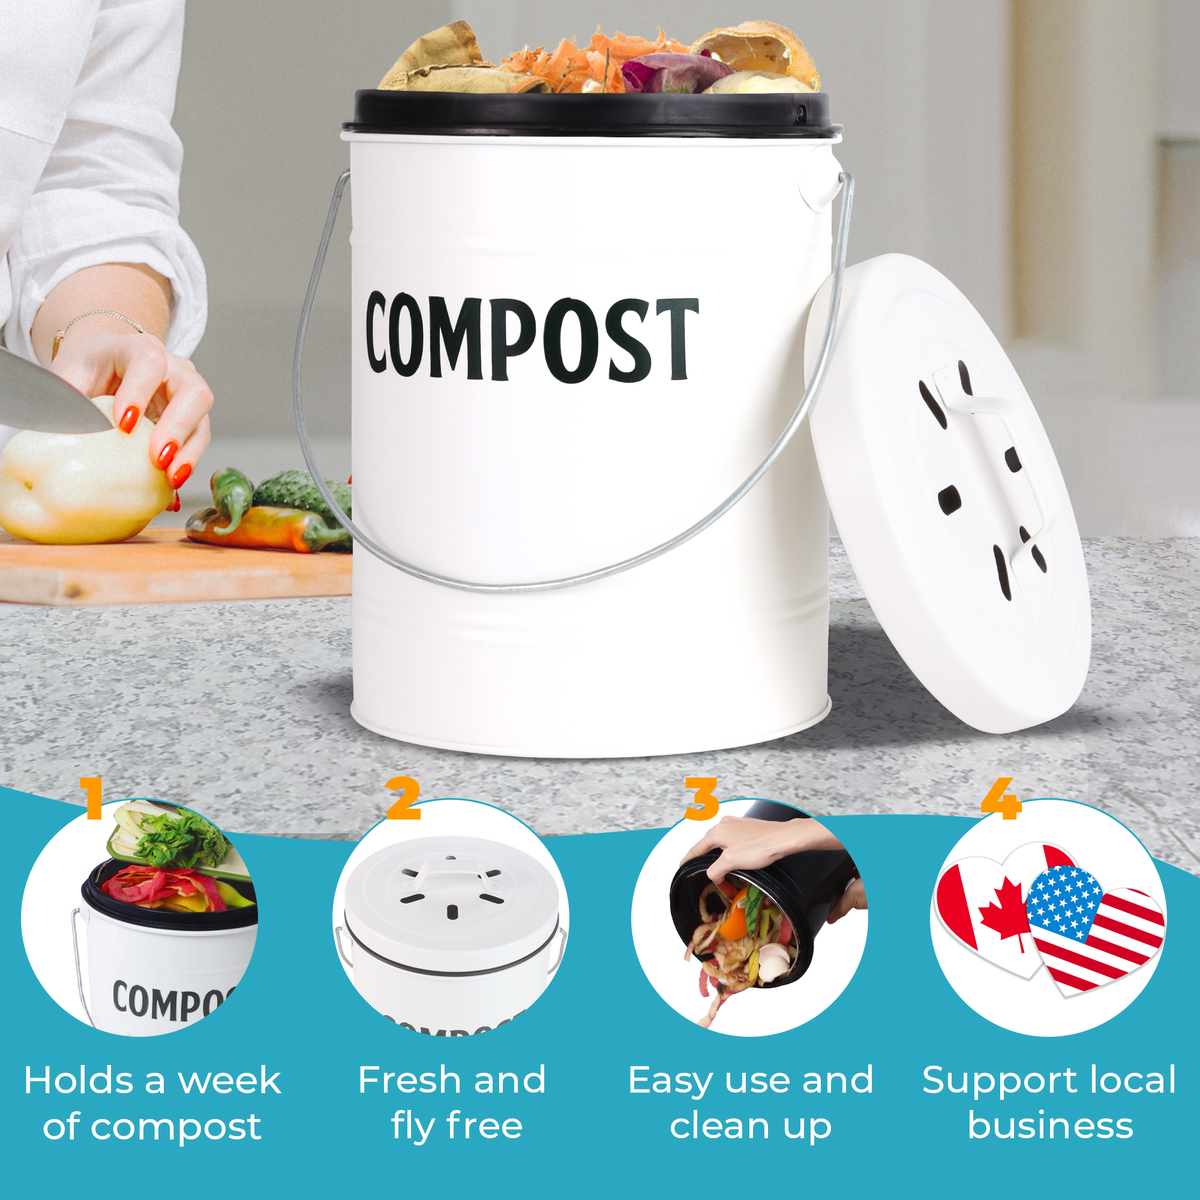 White Compost Bin product features easy use and clean up. Support local business